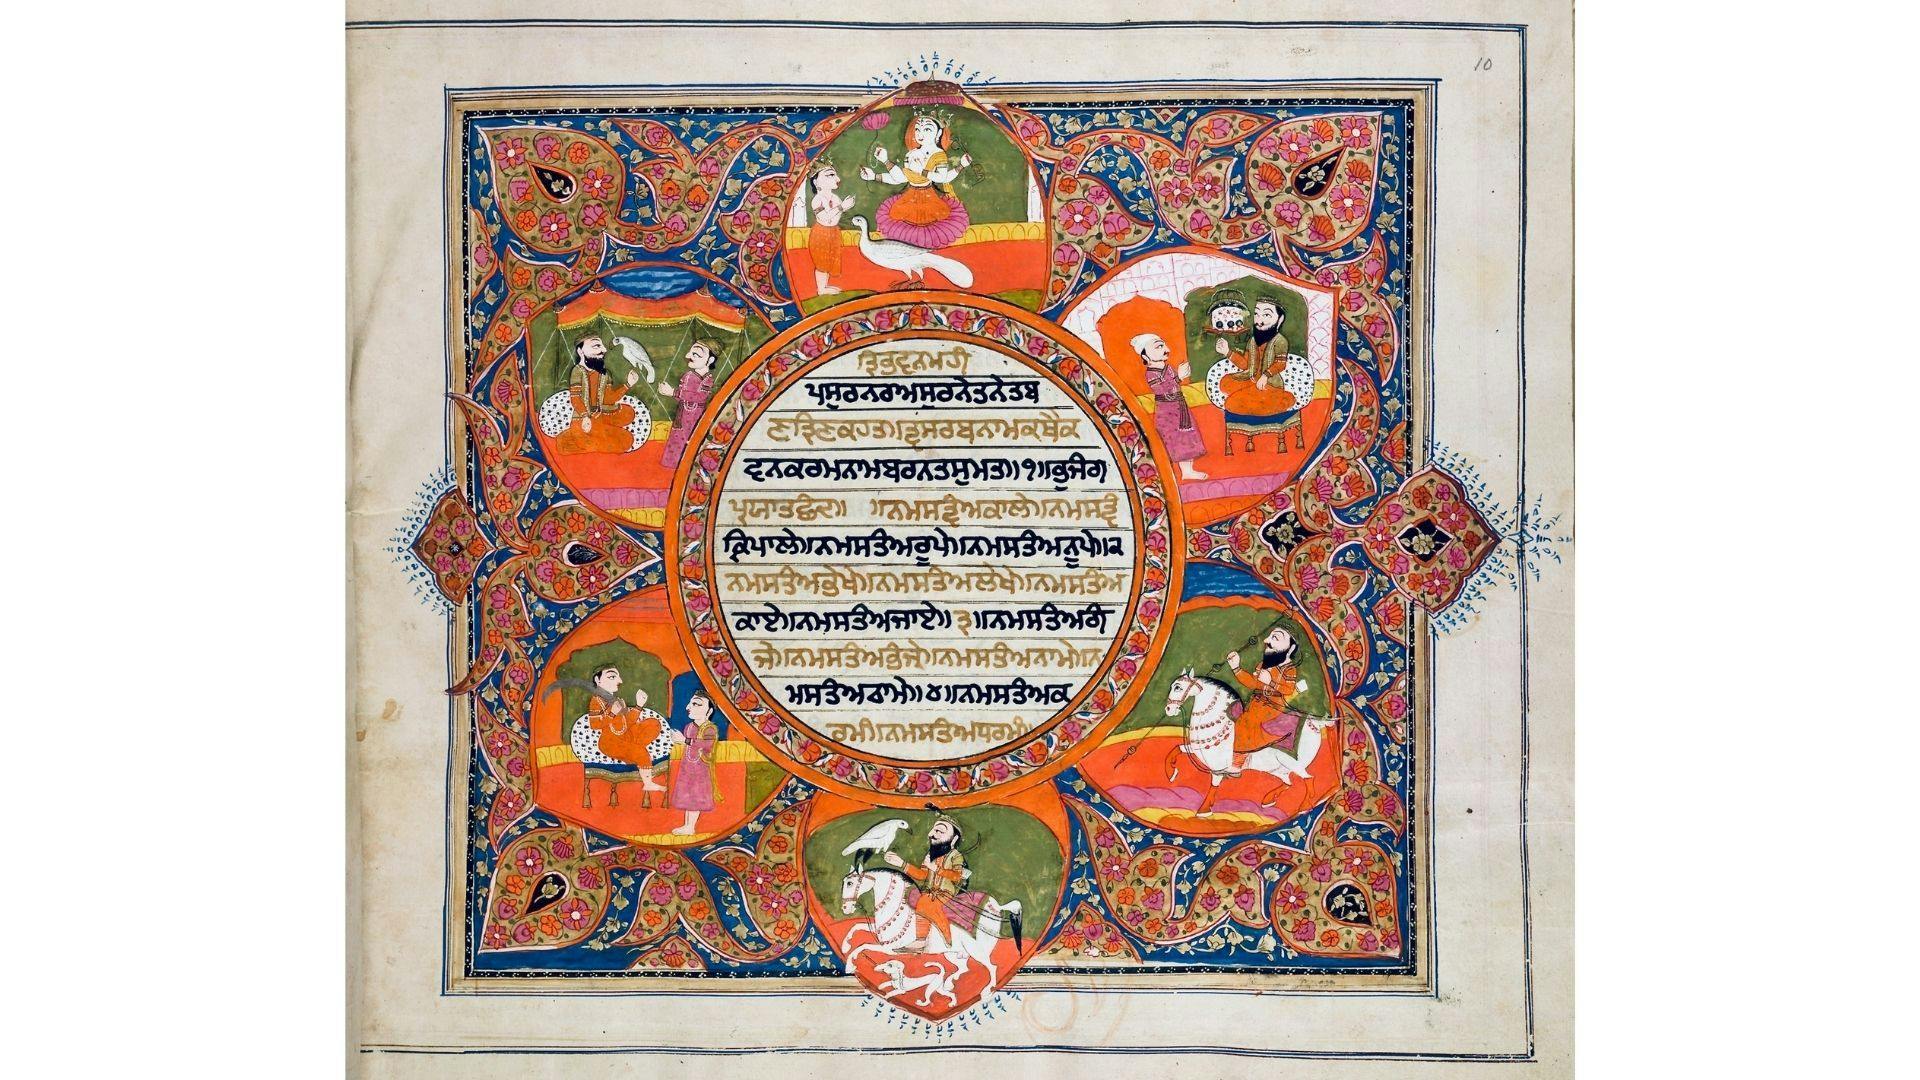 An early 19th-century Dasam Granth manuscript frontispiece from British Library